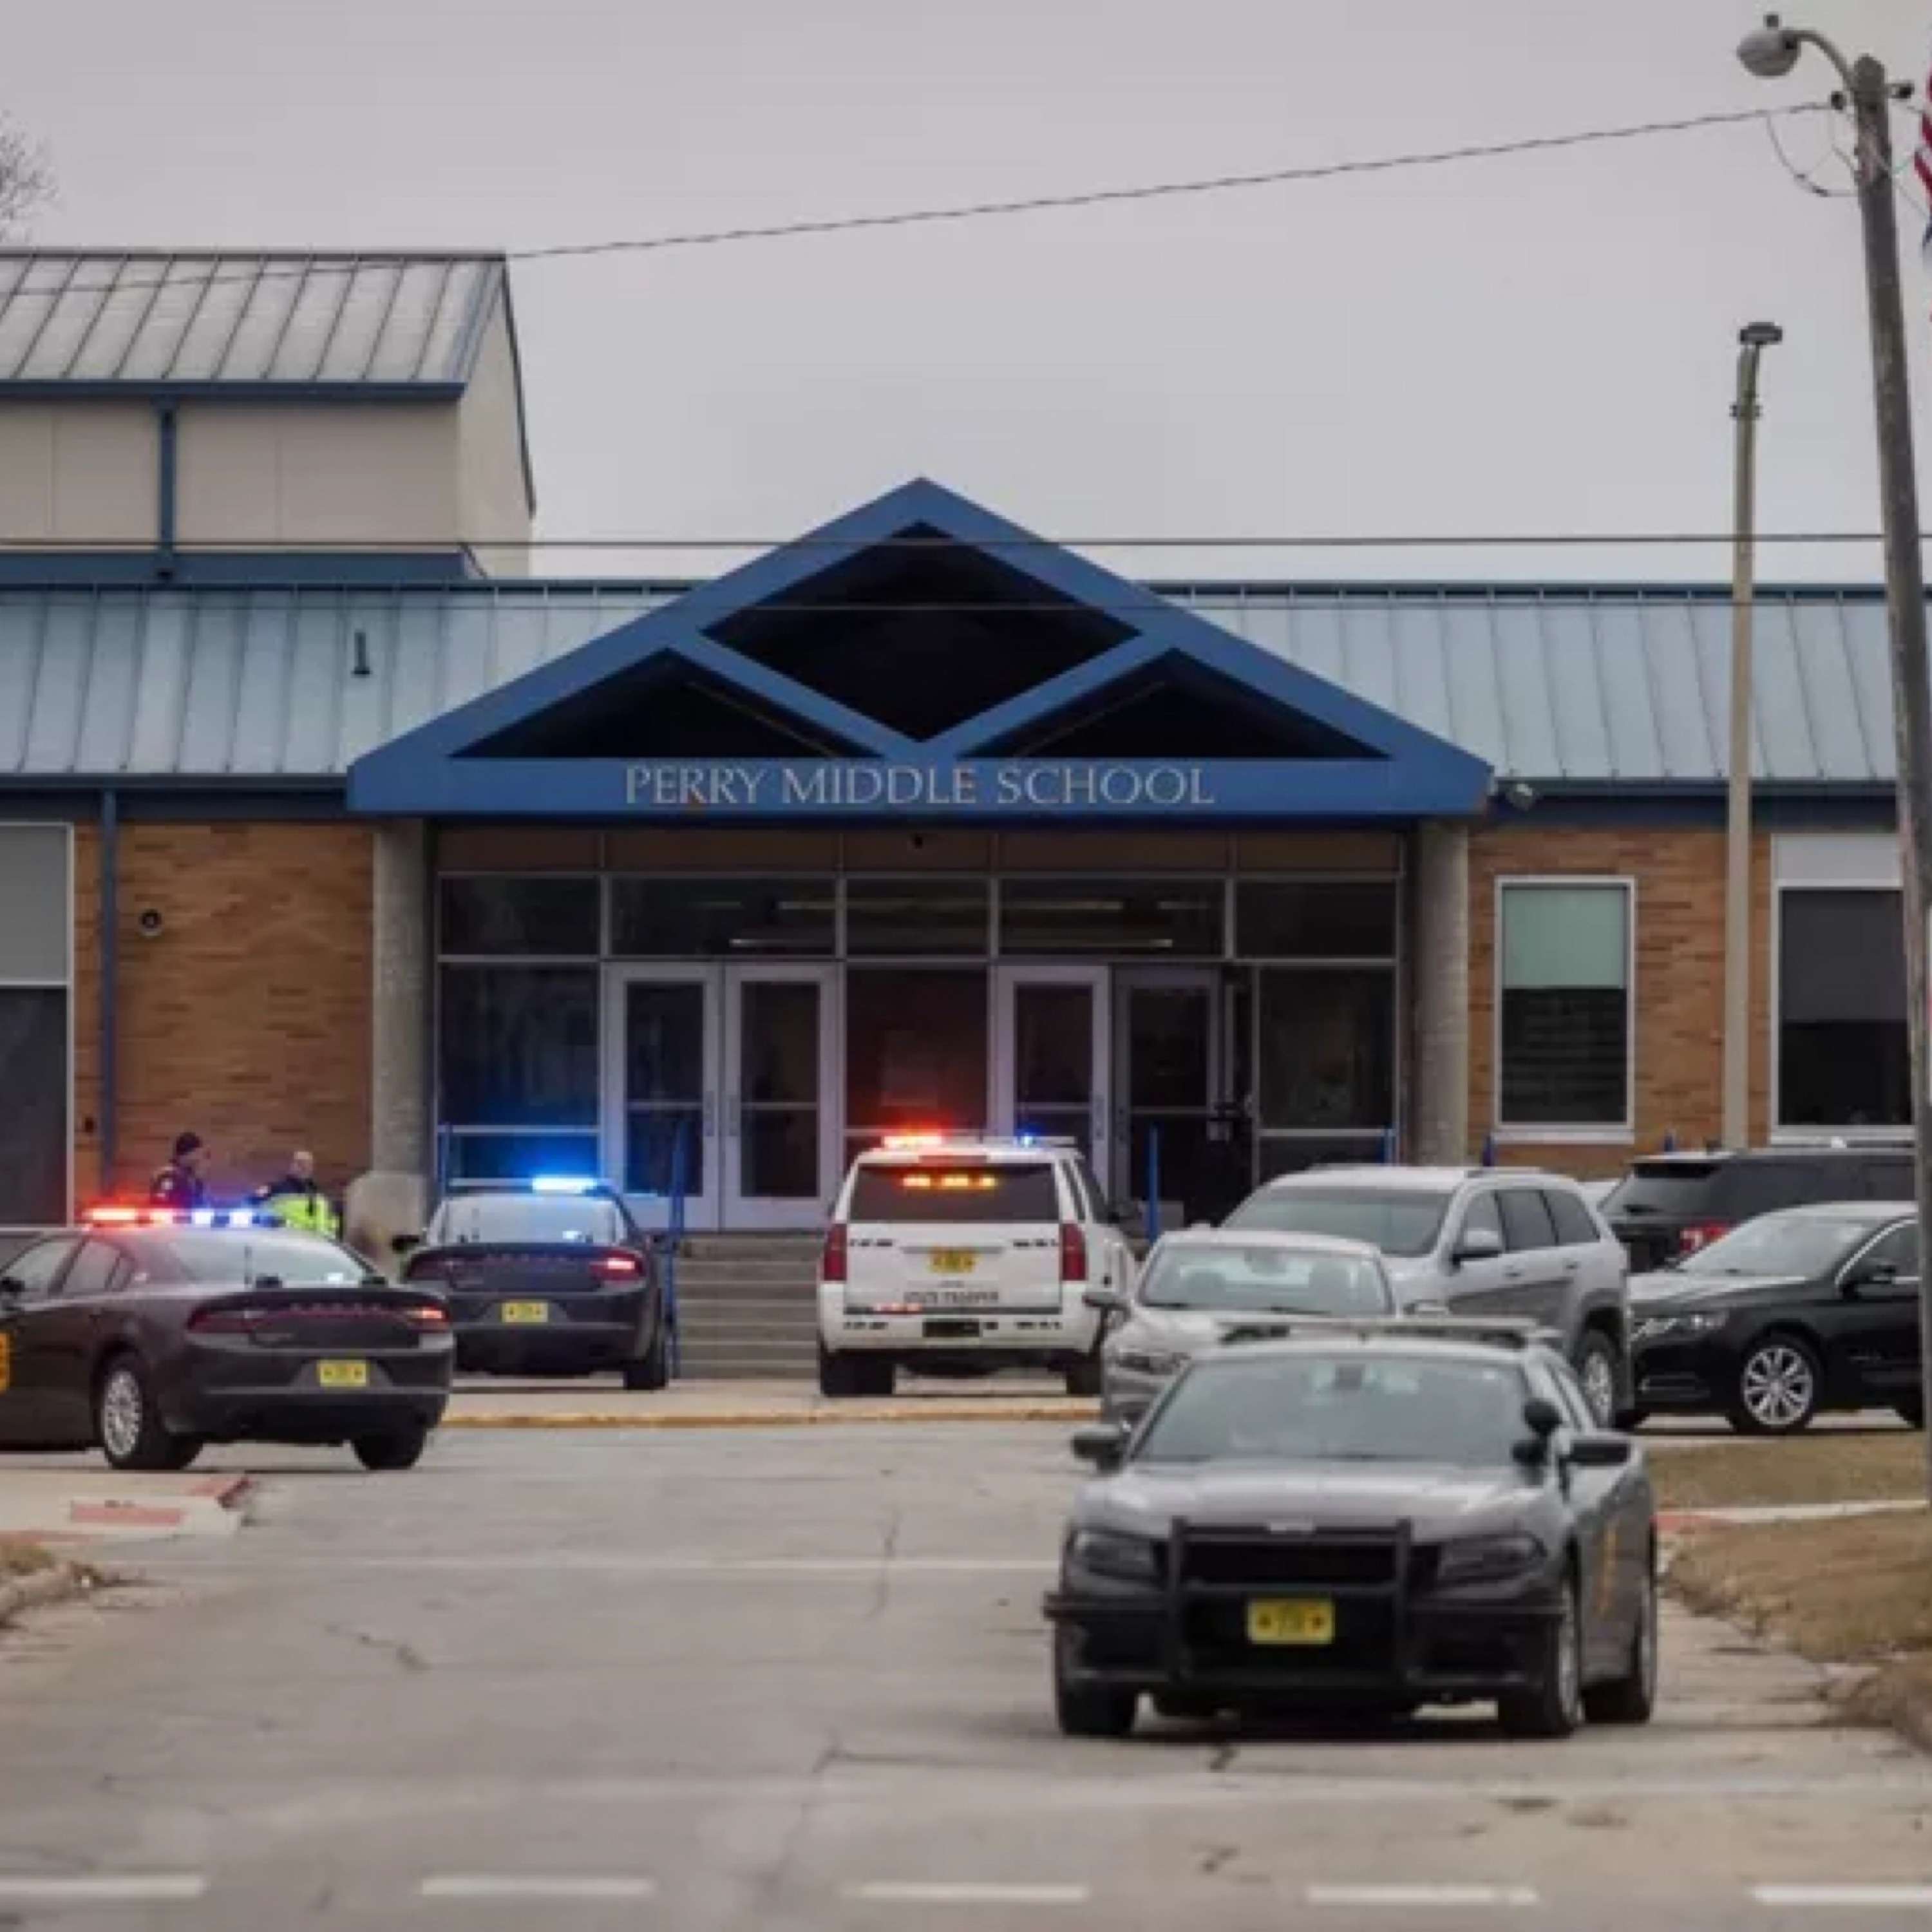 Principal Dies After Heroic Act in School Shooting,  AI Use Higher Among Christians, $13 Billion 'Dark Money' Funneled into Ivy League